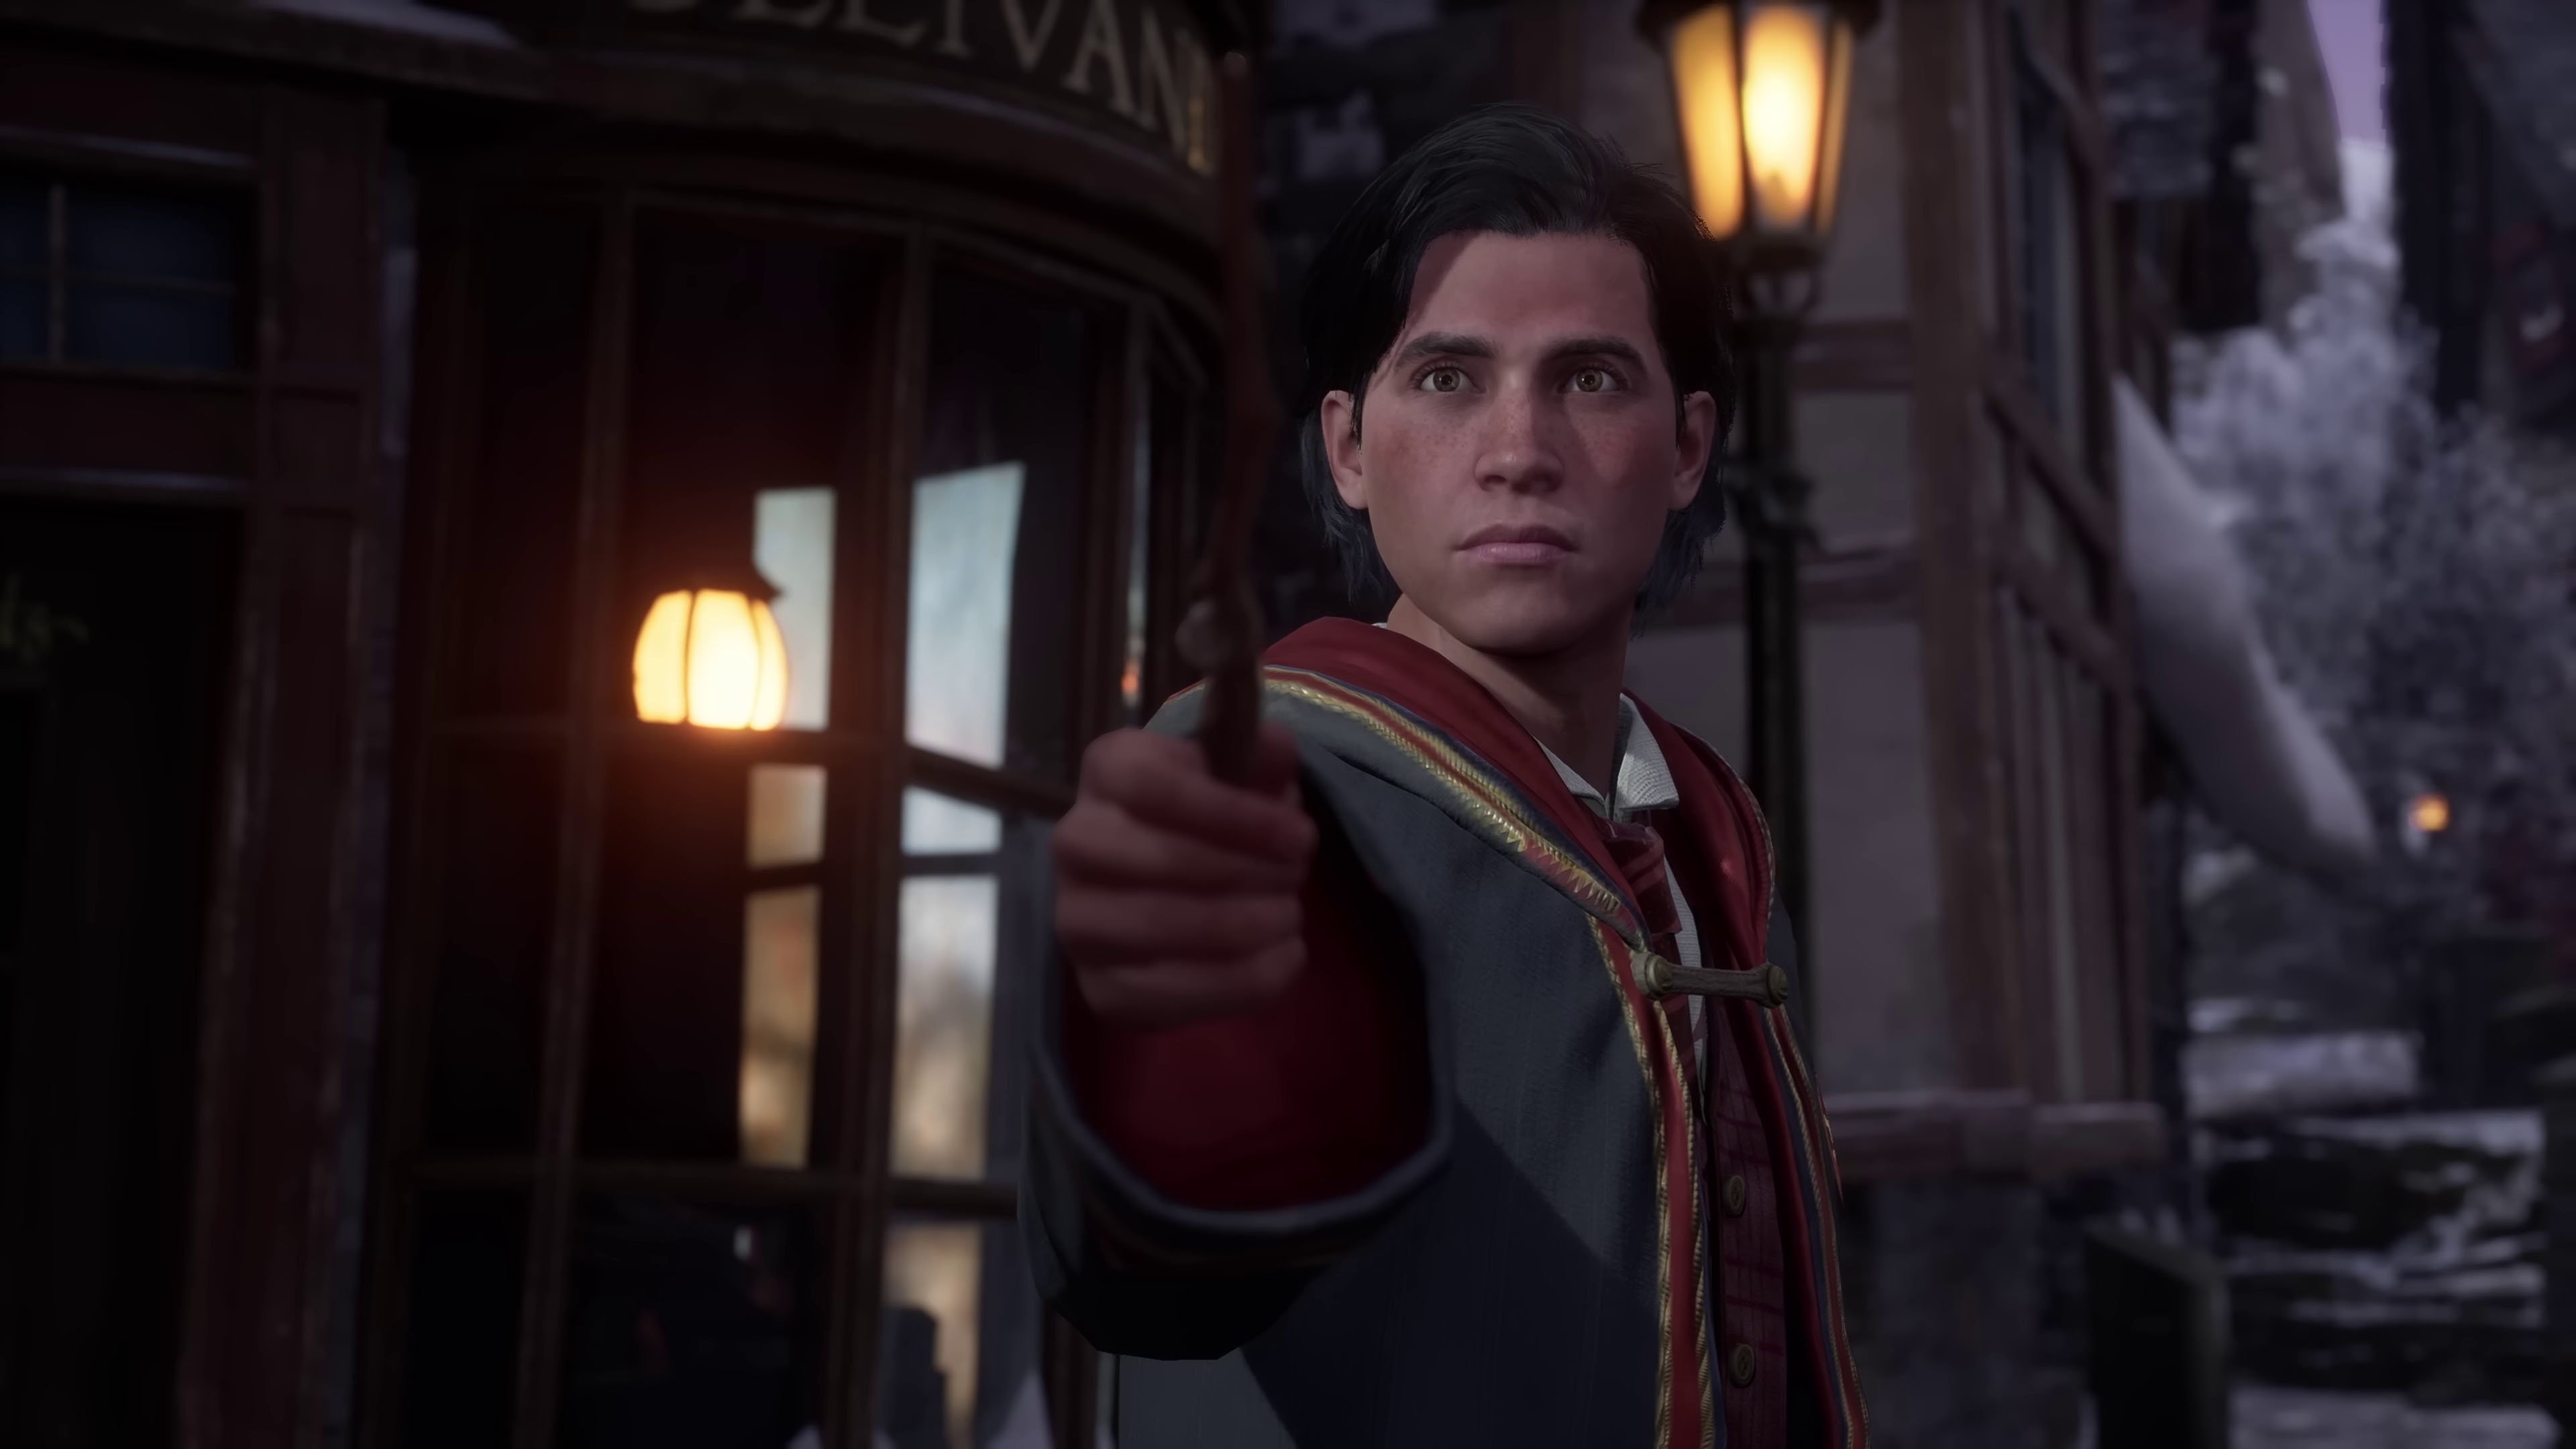 Hogwarts Legacy preview: This could be the wizarding RPG we've been waiting  for